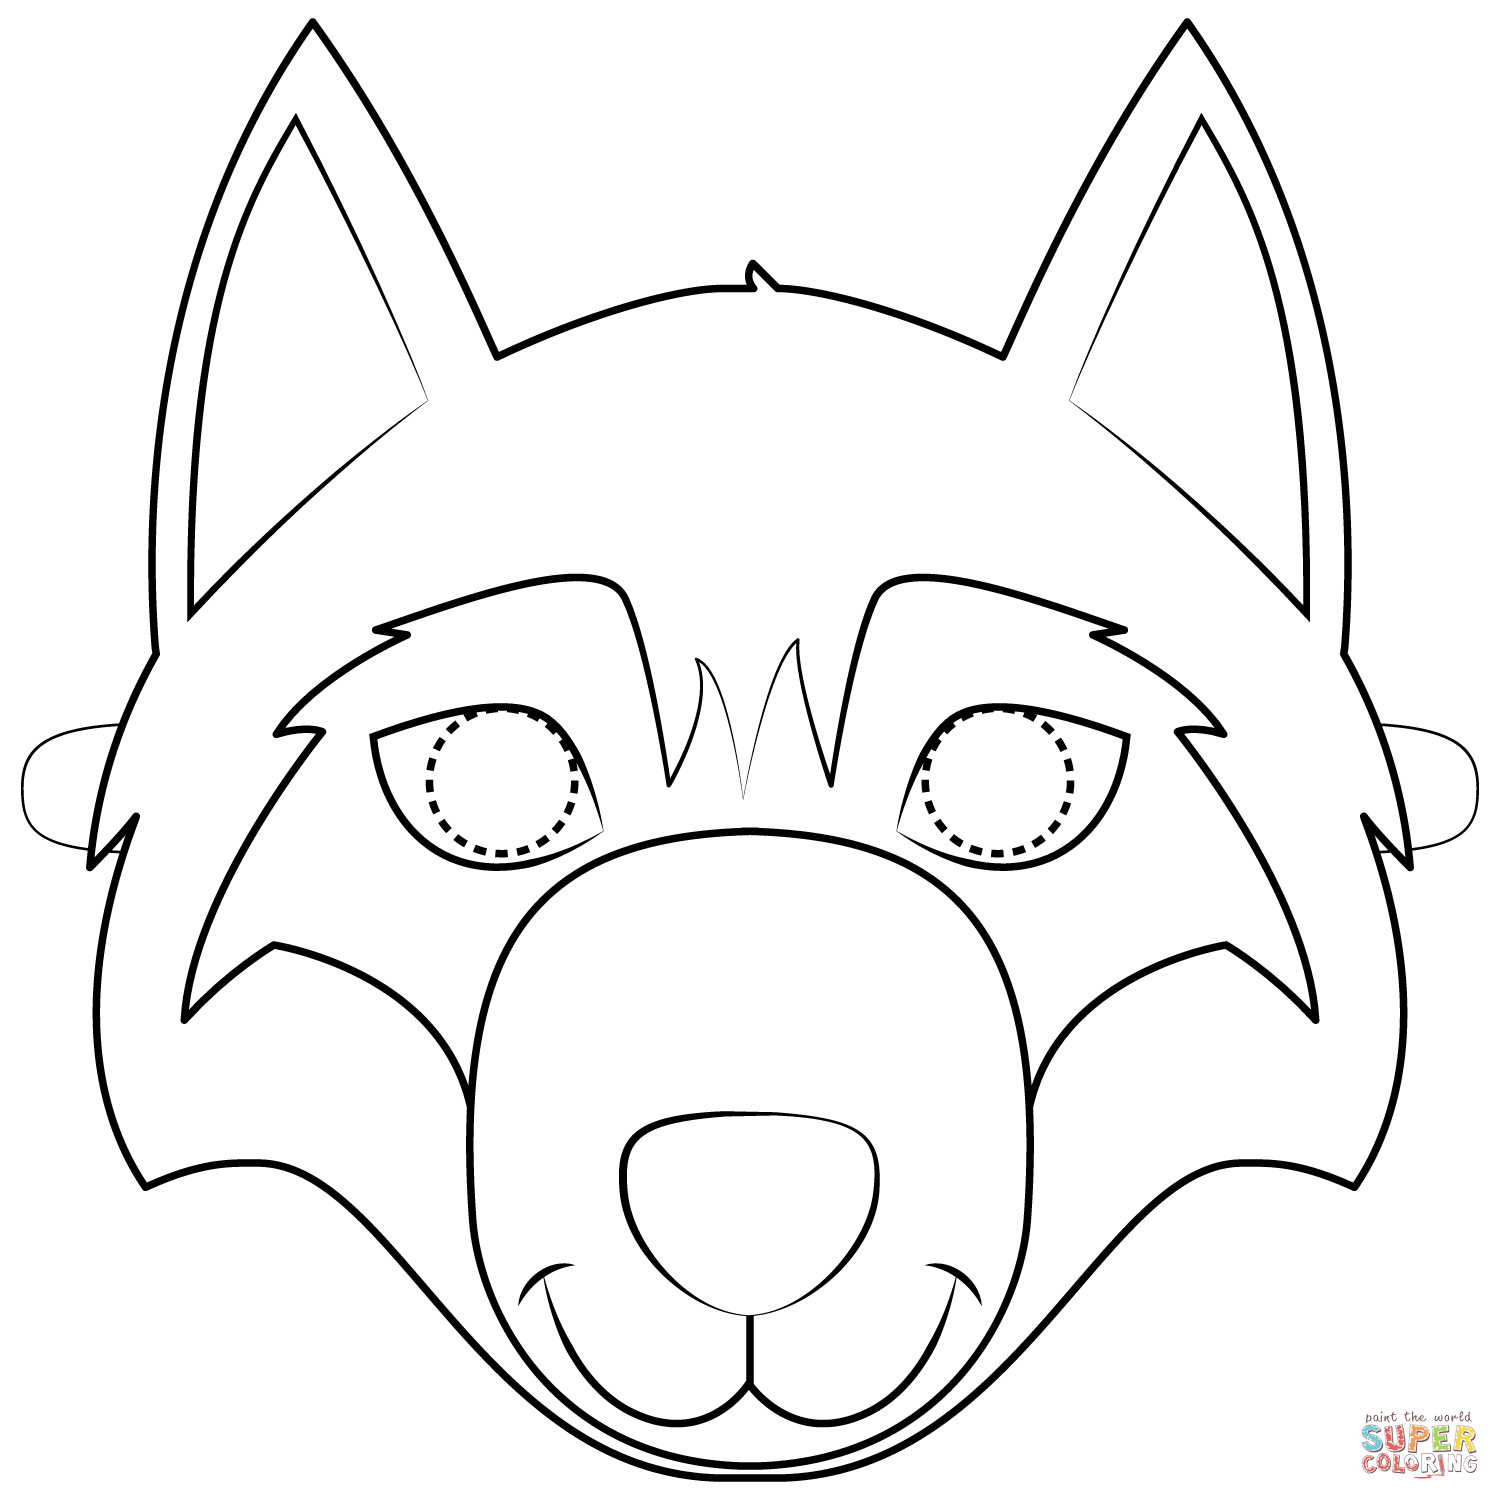 Wolf Mask Coloring Page | Free Printable Coloring Pages - Free Printable Wolf Mask